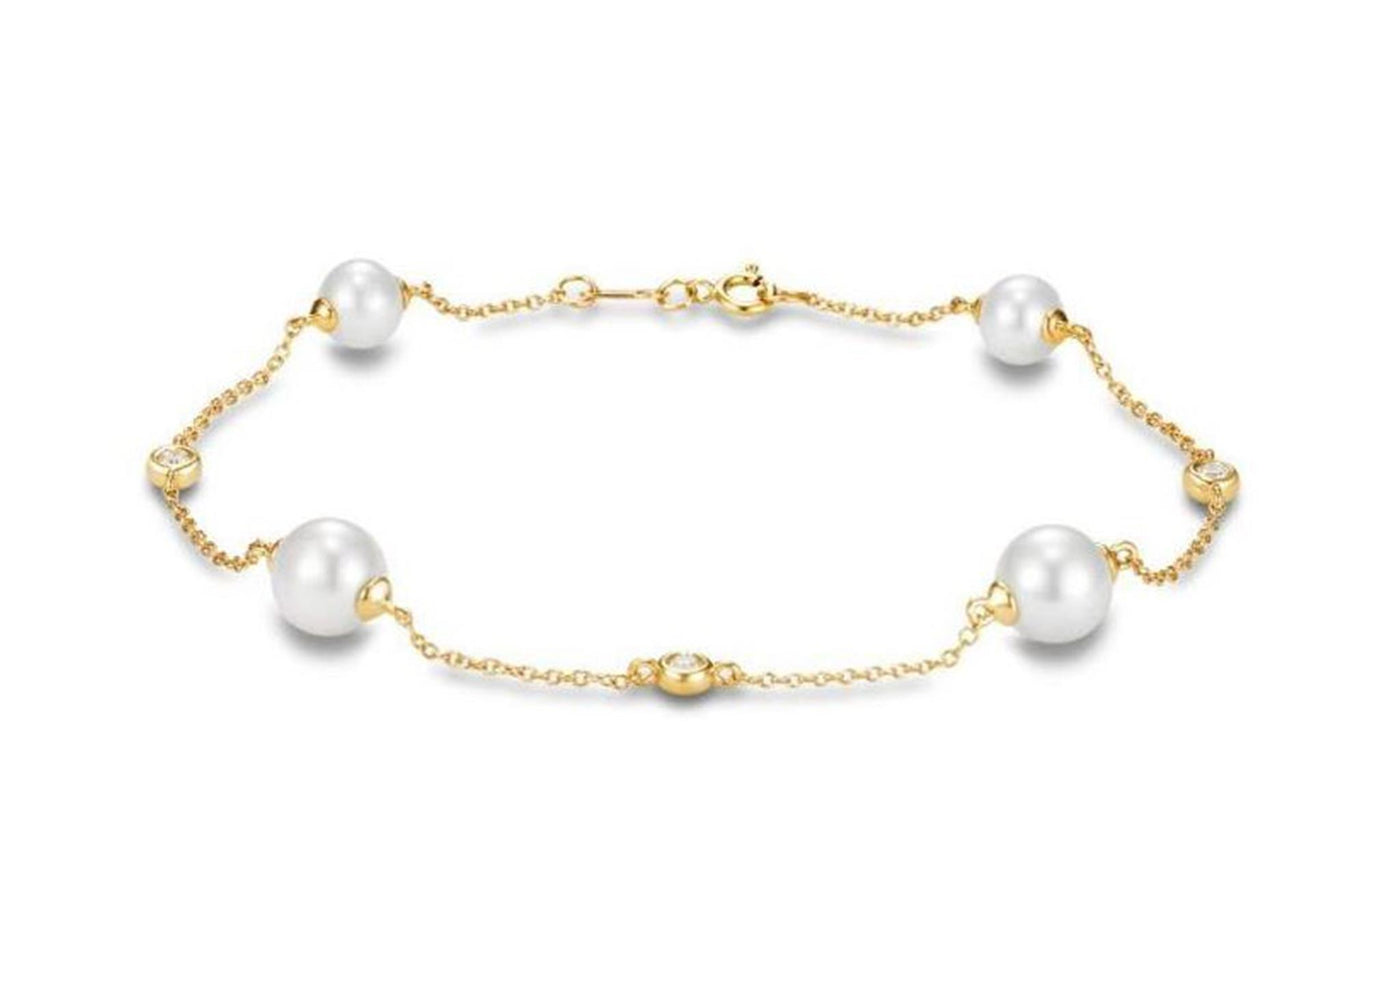 14K Yellow Gold 7.5" Freshwater Pearls and Diamond Station Bracelet.